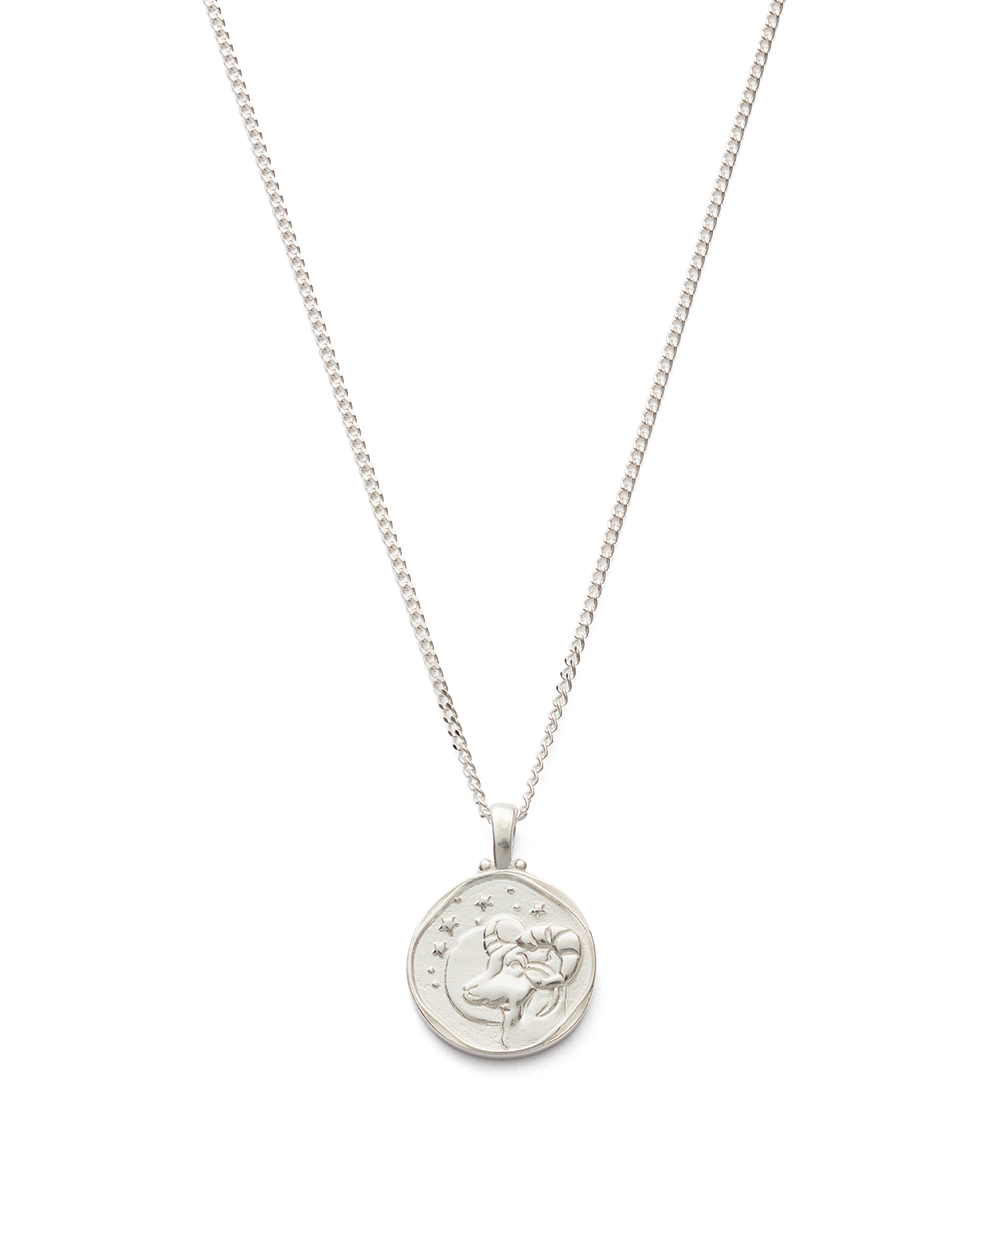 ARIES ZODIAC NECKLACE (STERLING SILVER) - IMAGE 1